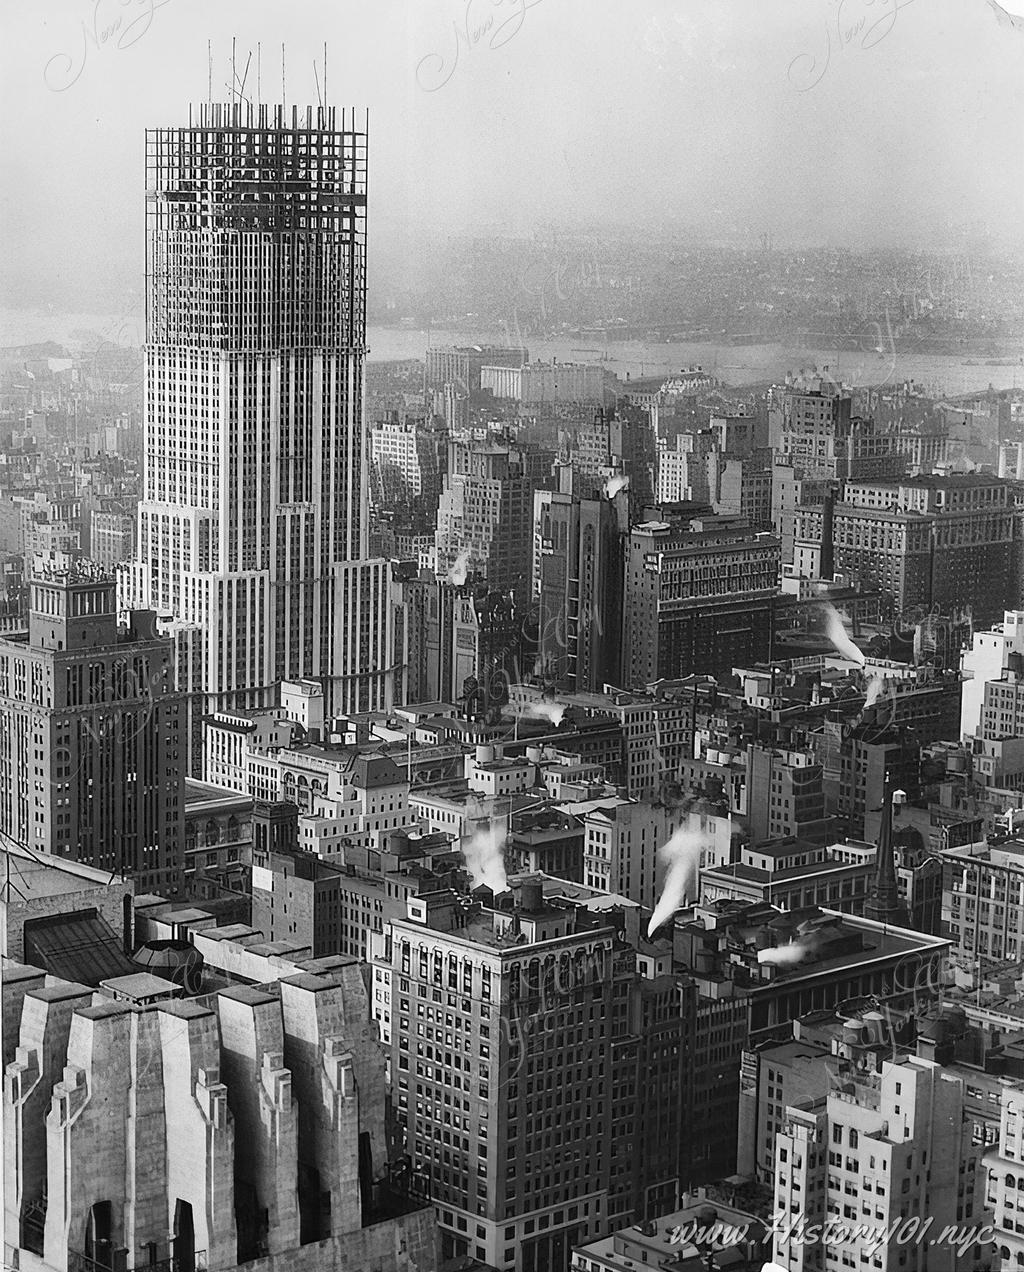 Bird's eye view of midtown Manhattan and the Empire State Building, about 75% complete with half of its steel structure visible.